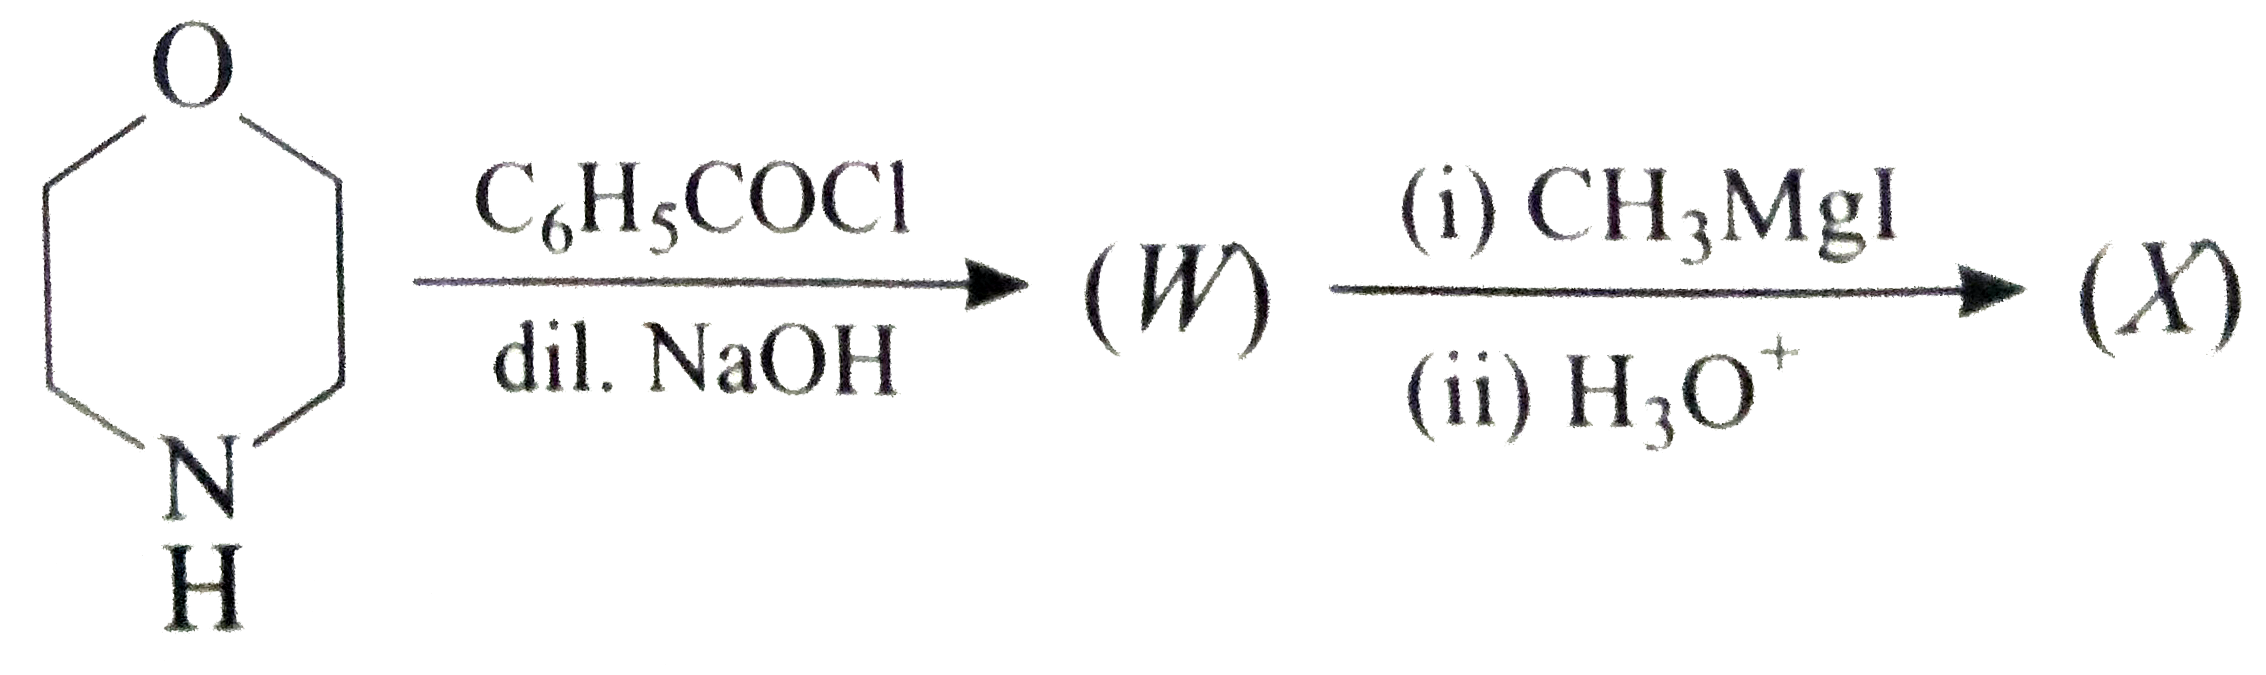 The major product (X) formed in the reaction sequence is  :